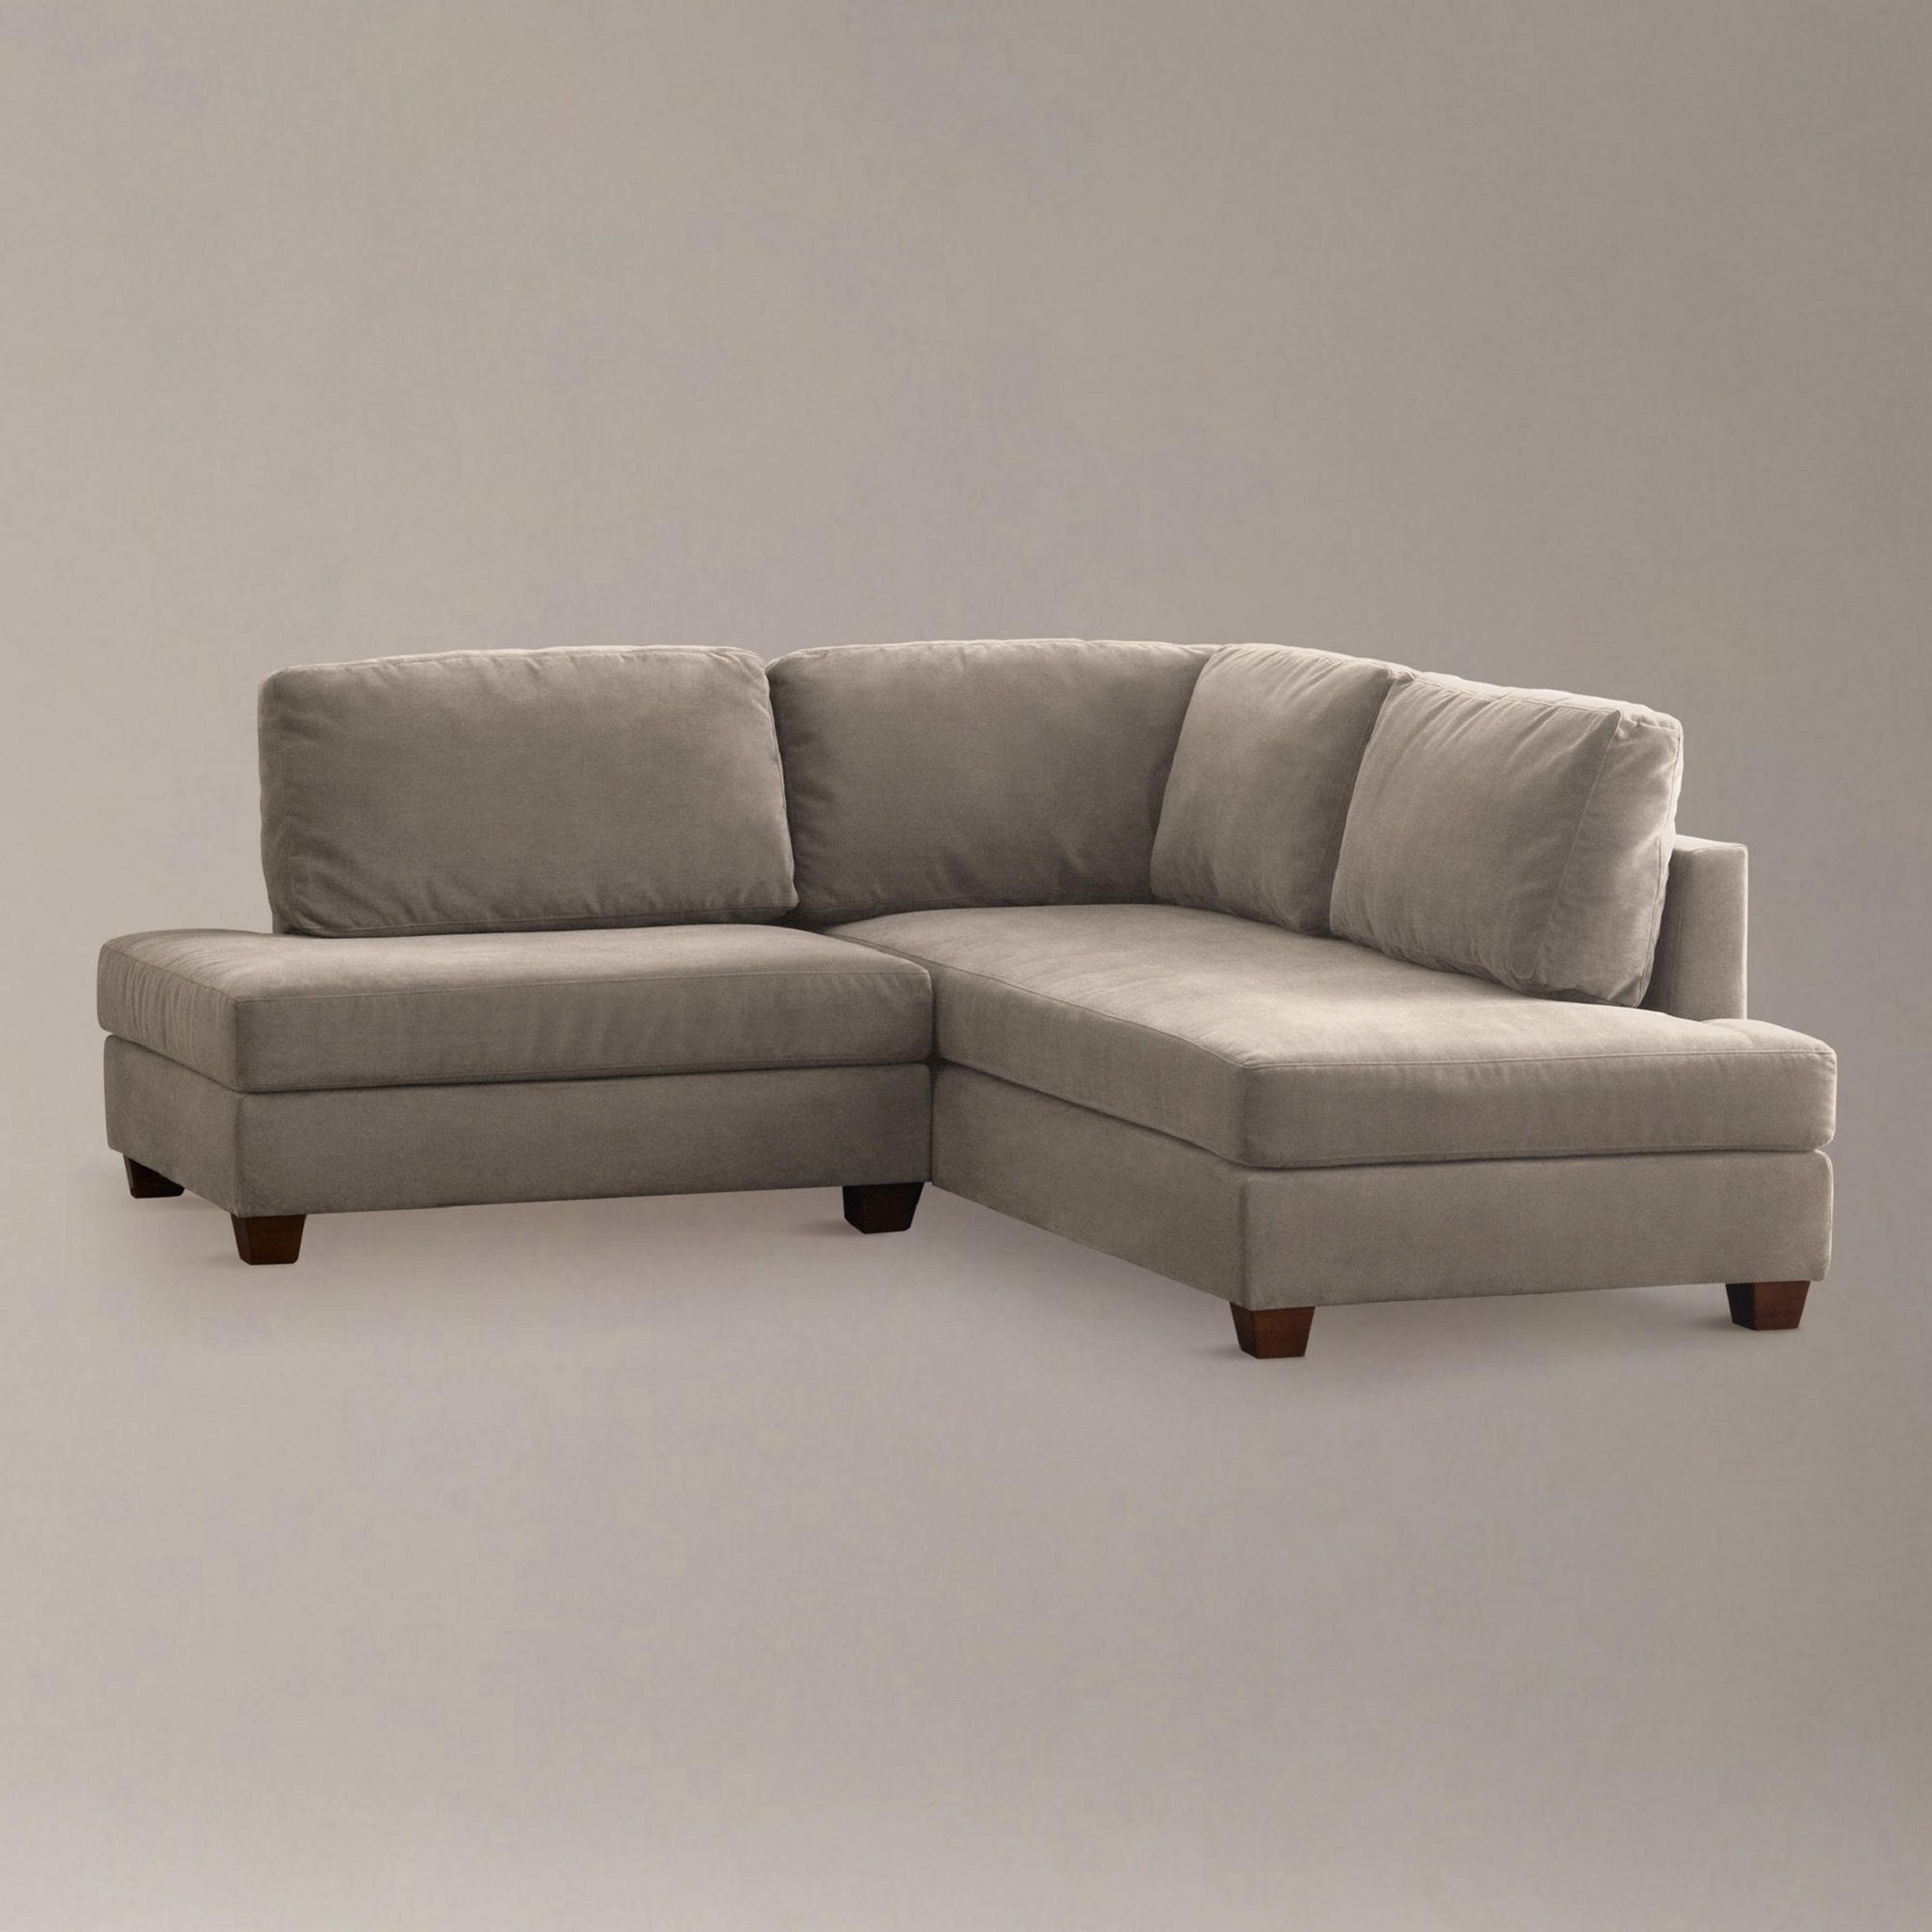 Sectional couches for small spaces